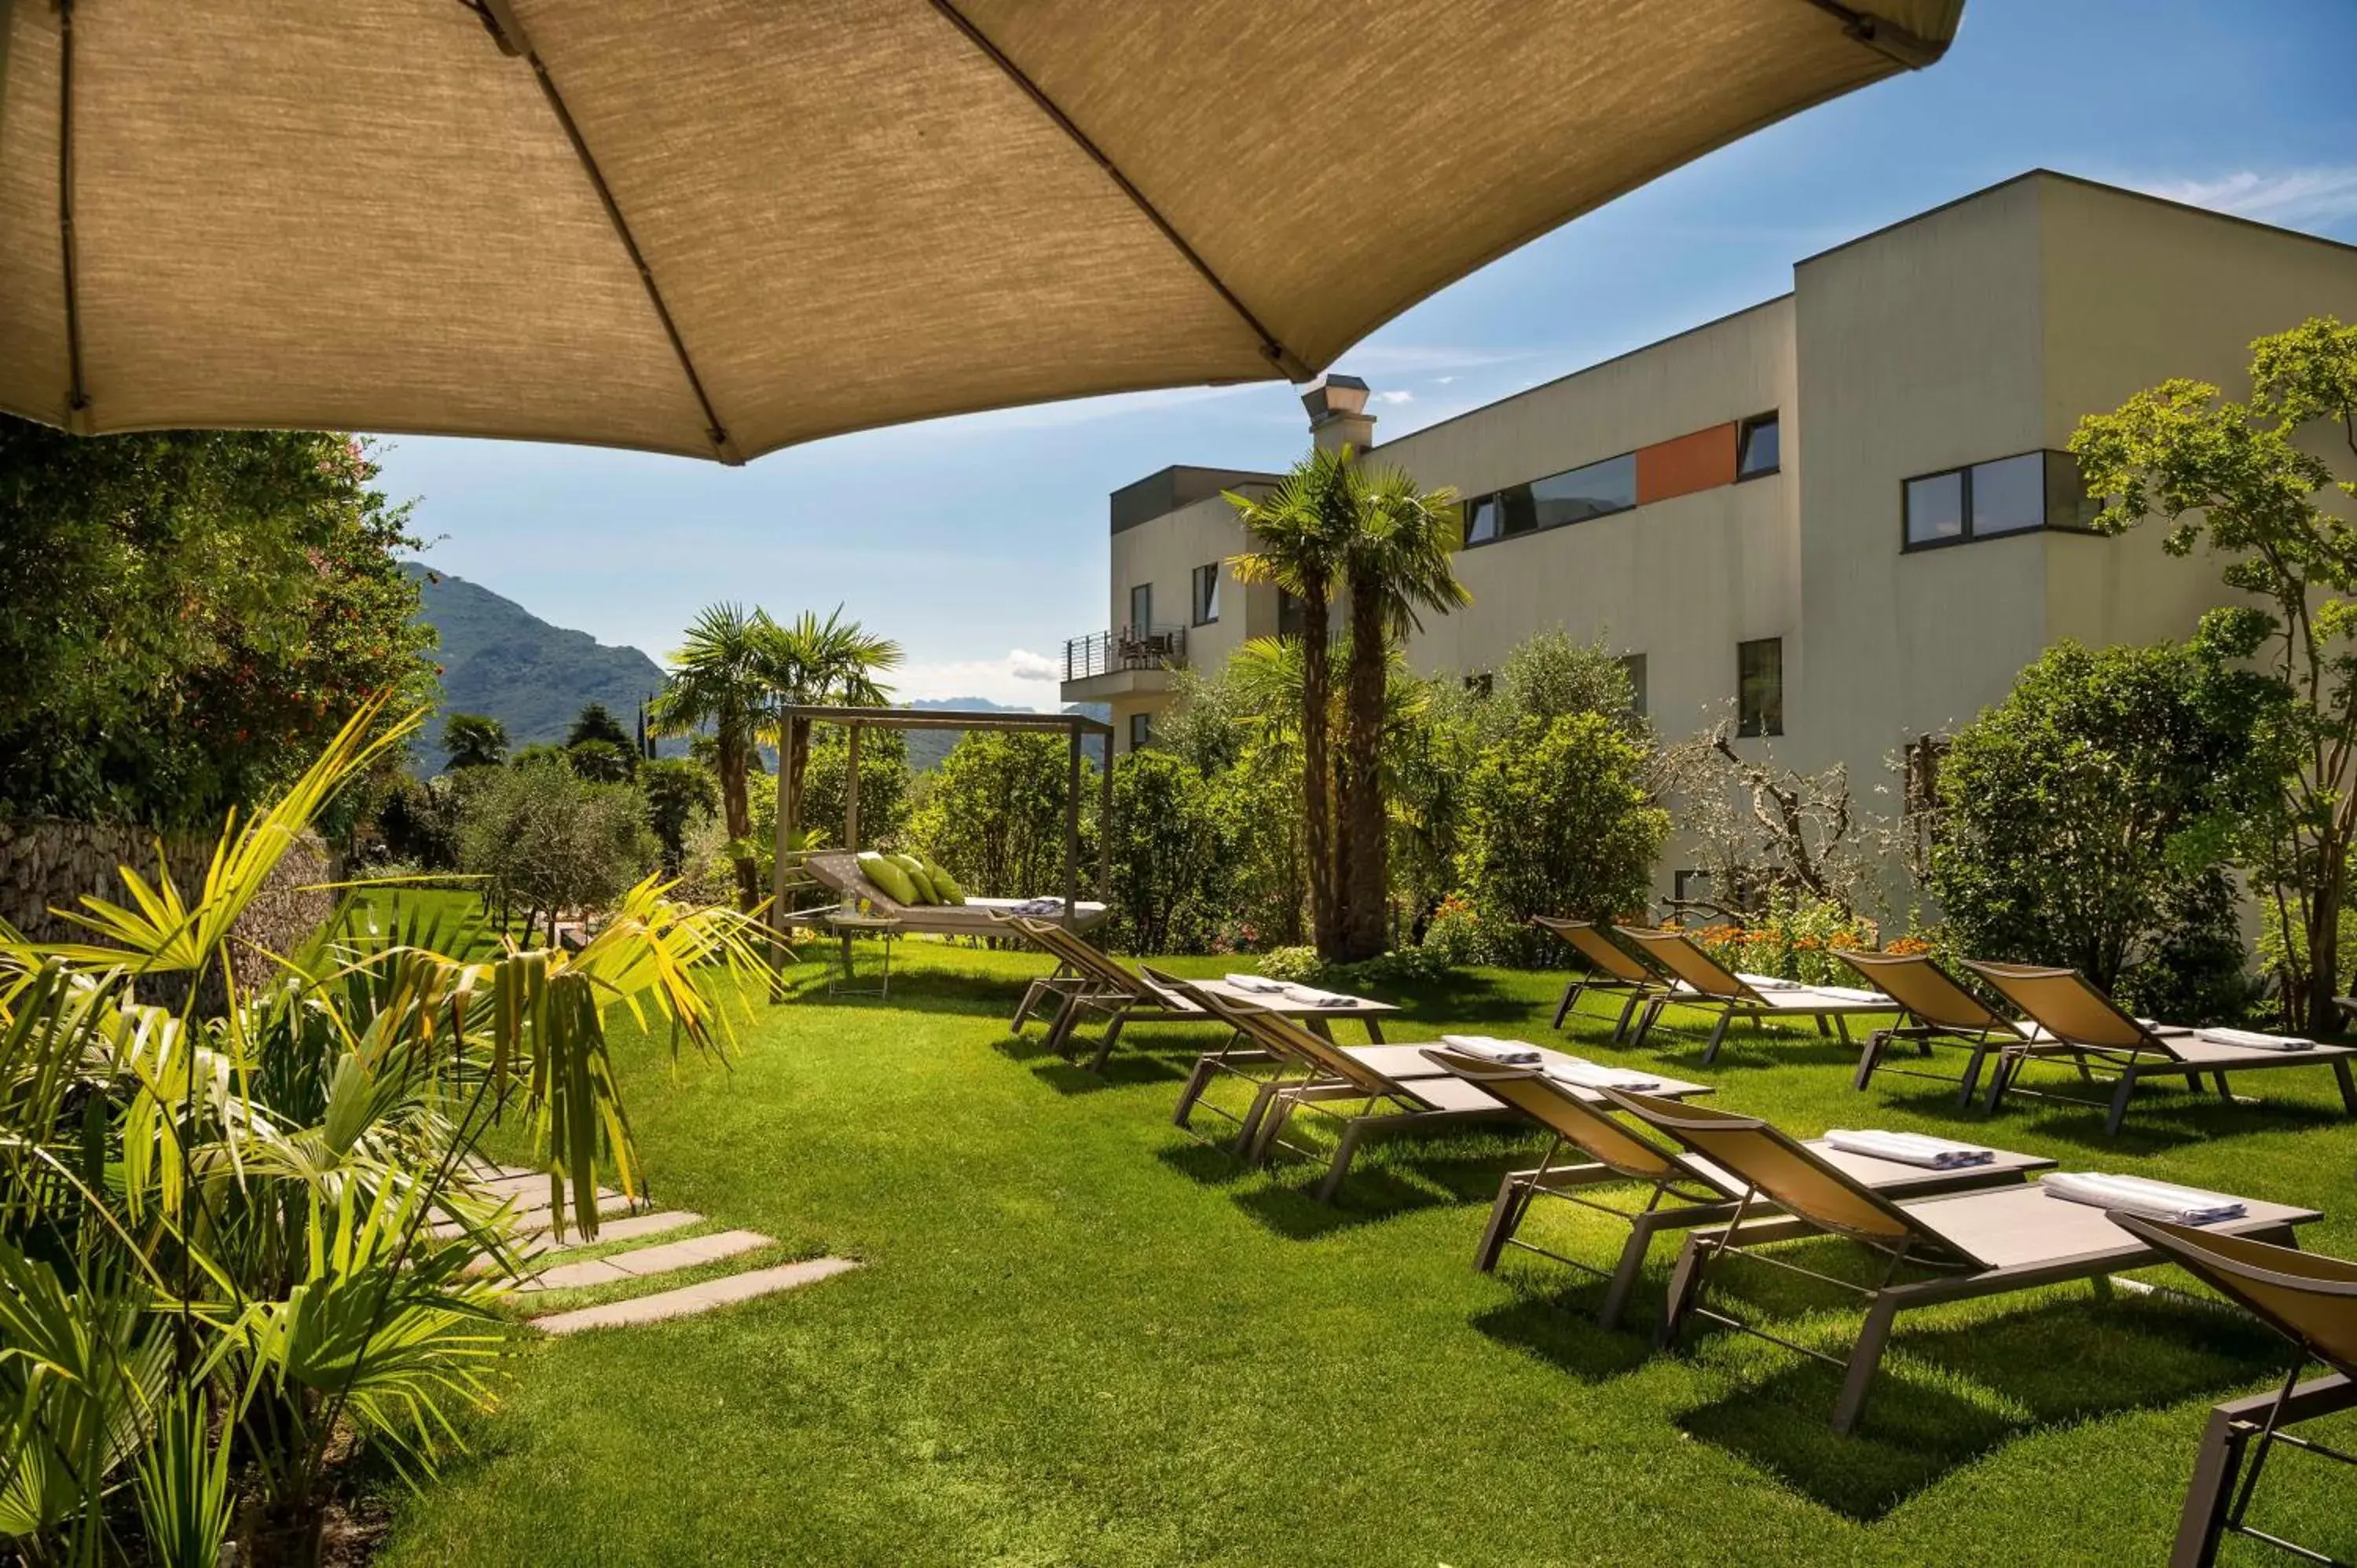 Property Building in Active & Family Hotel Gioiosa